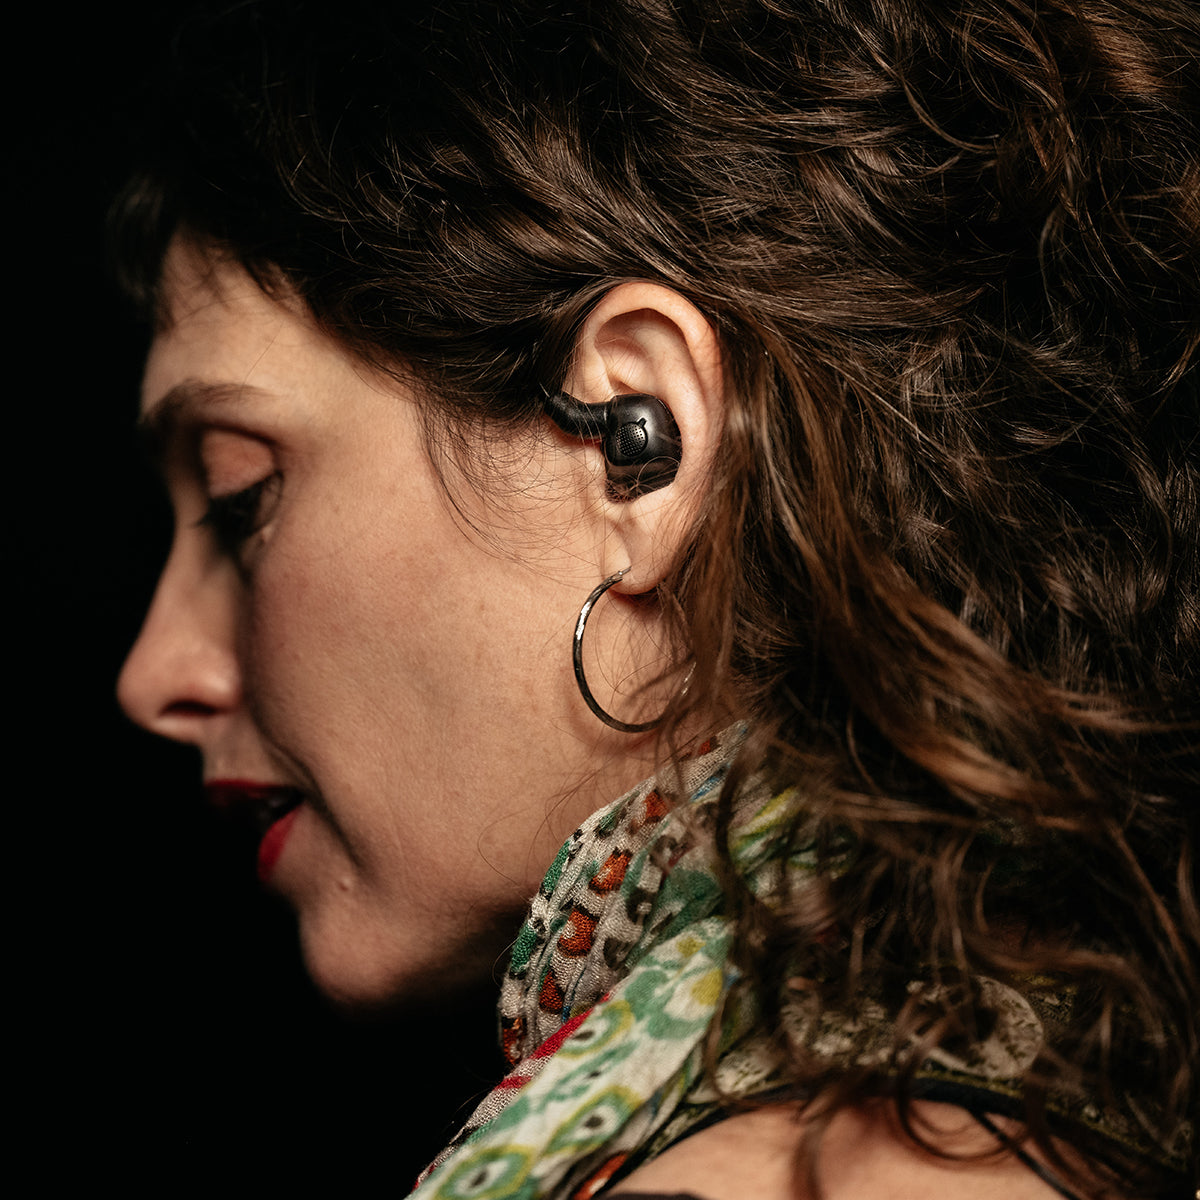 3DME In-Ear Monitor System